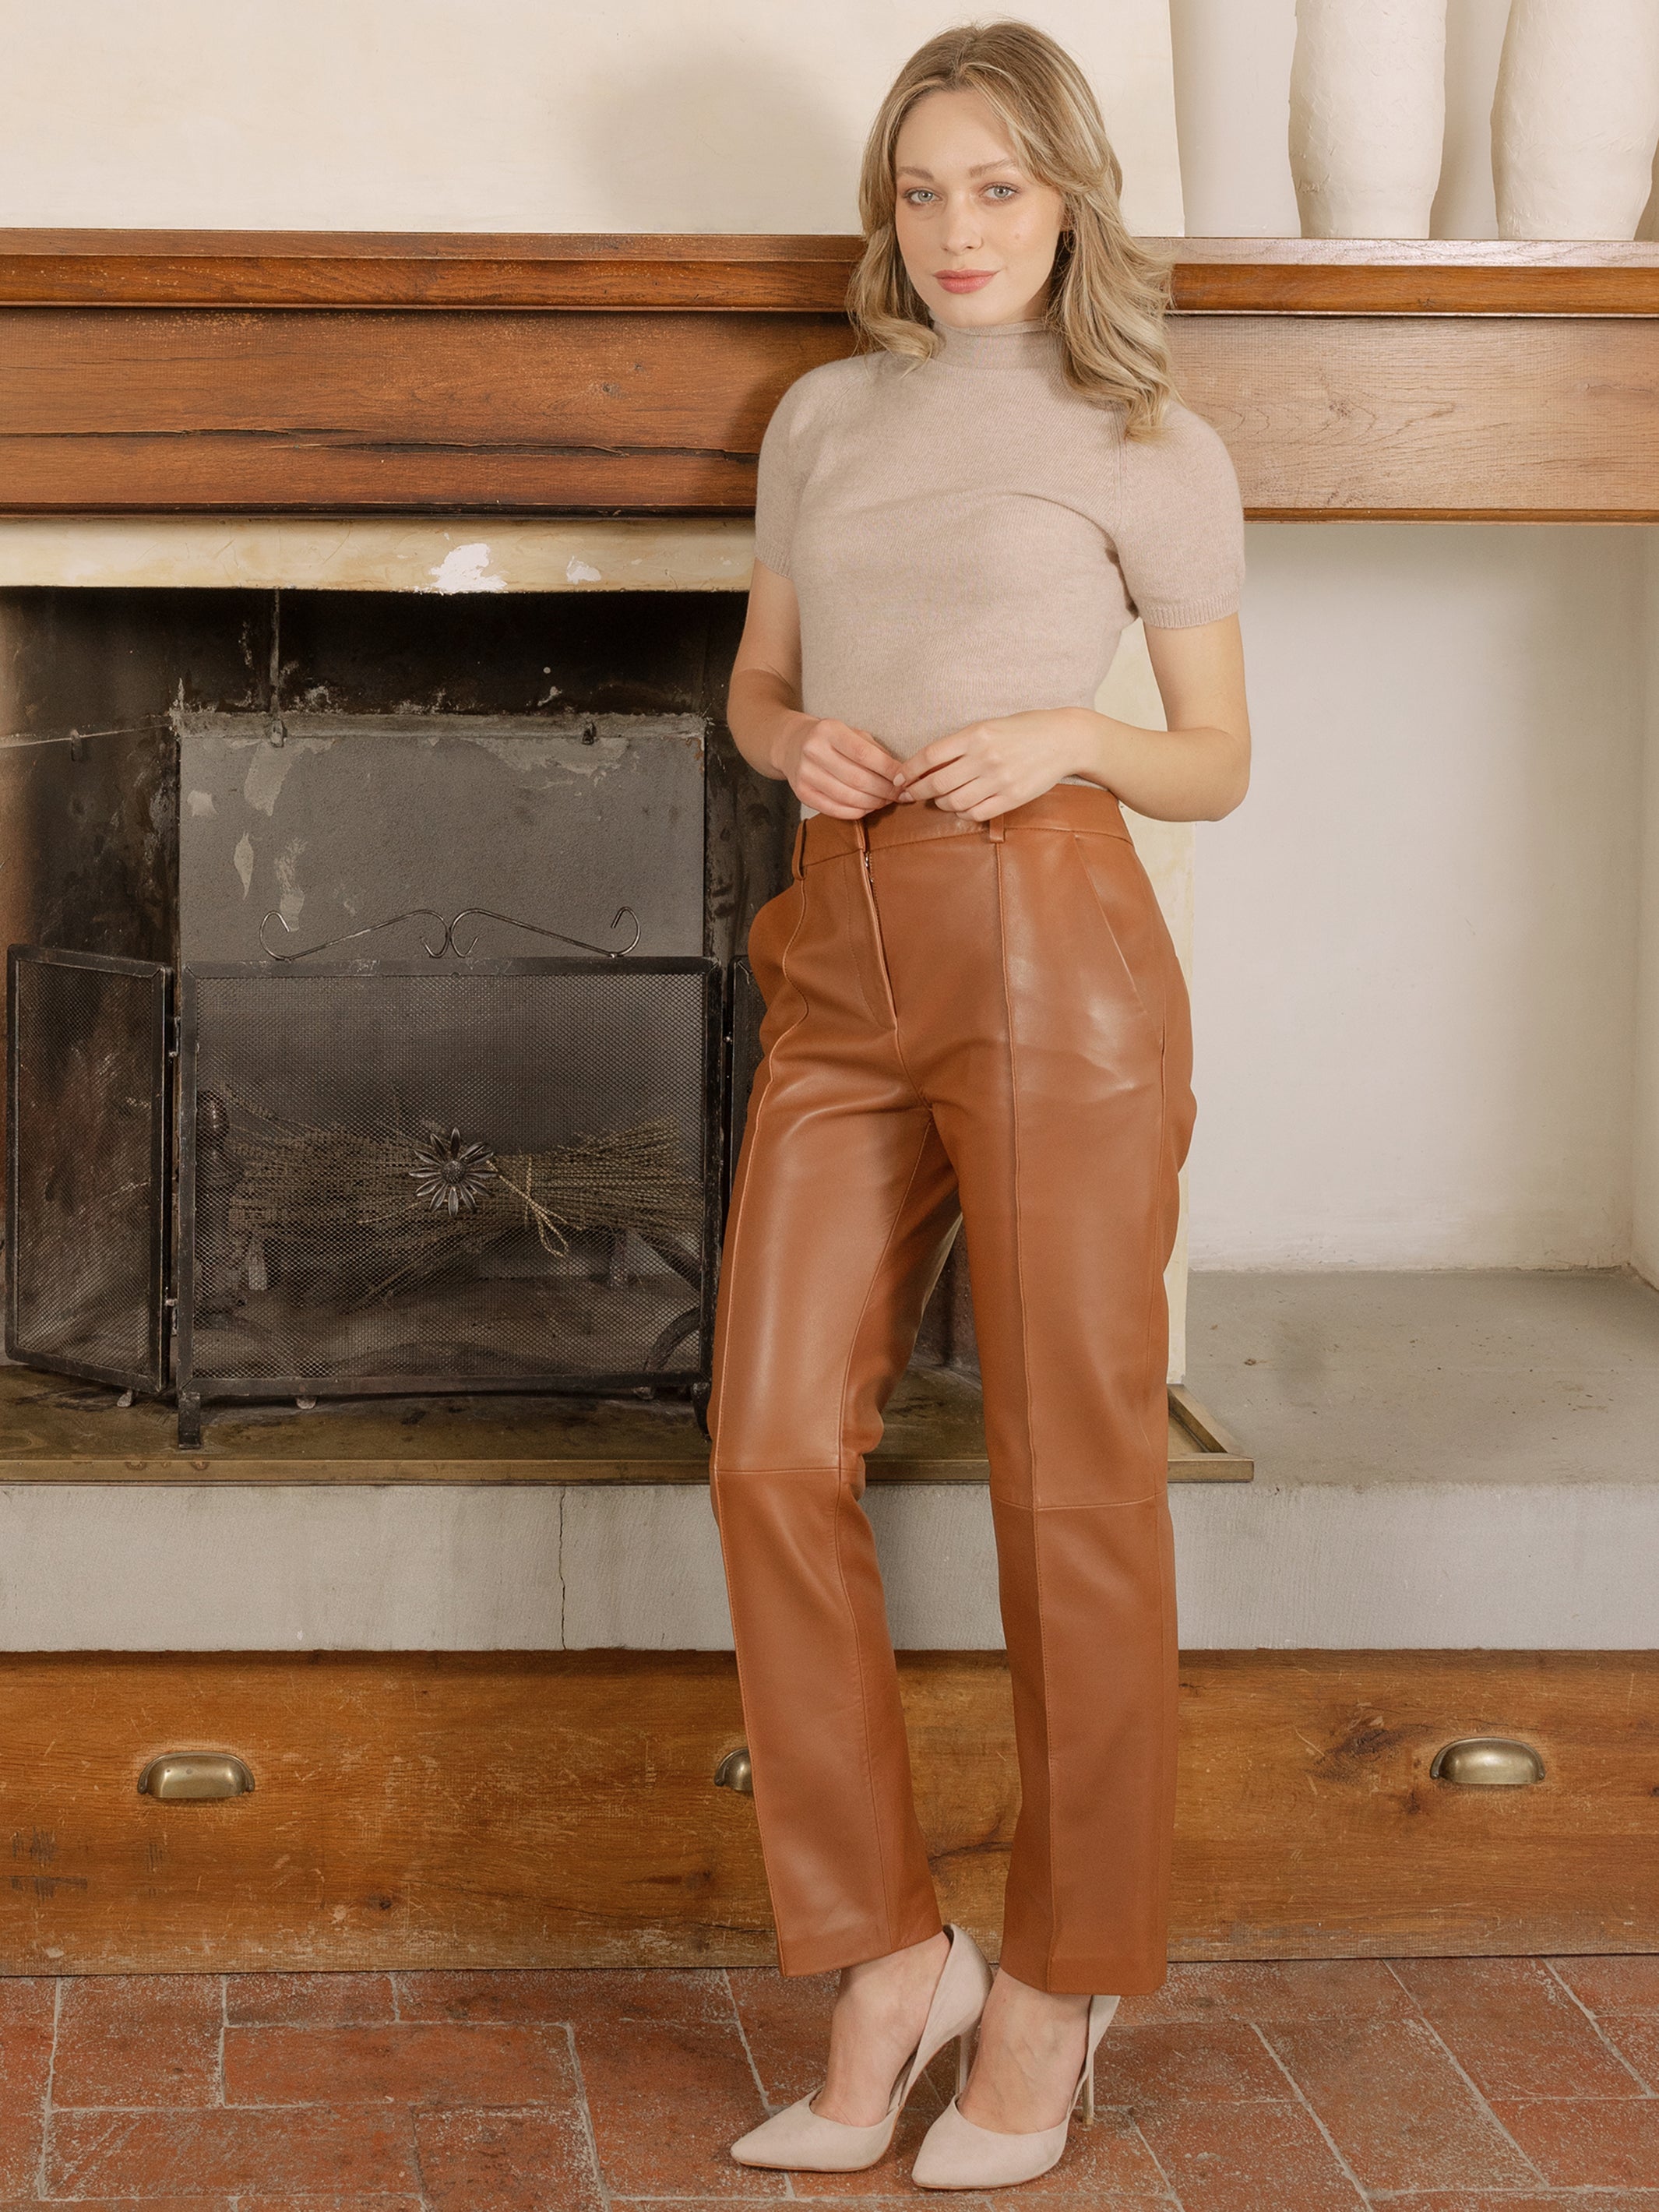 How to wear the leather trousers – and style them well at any age